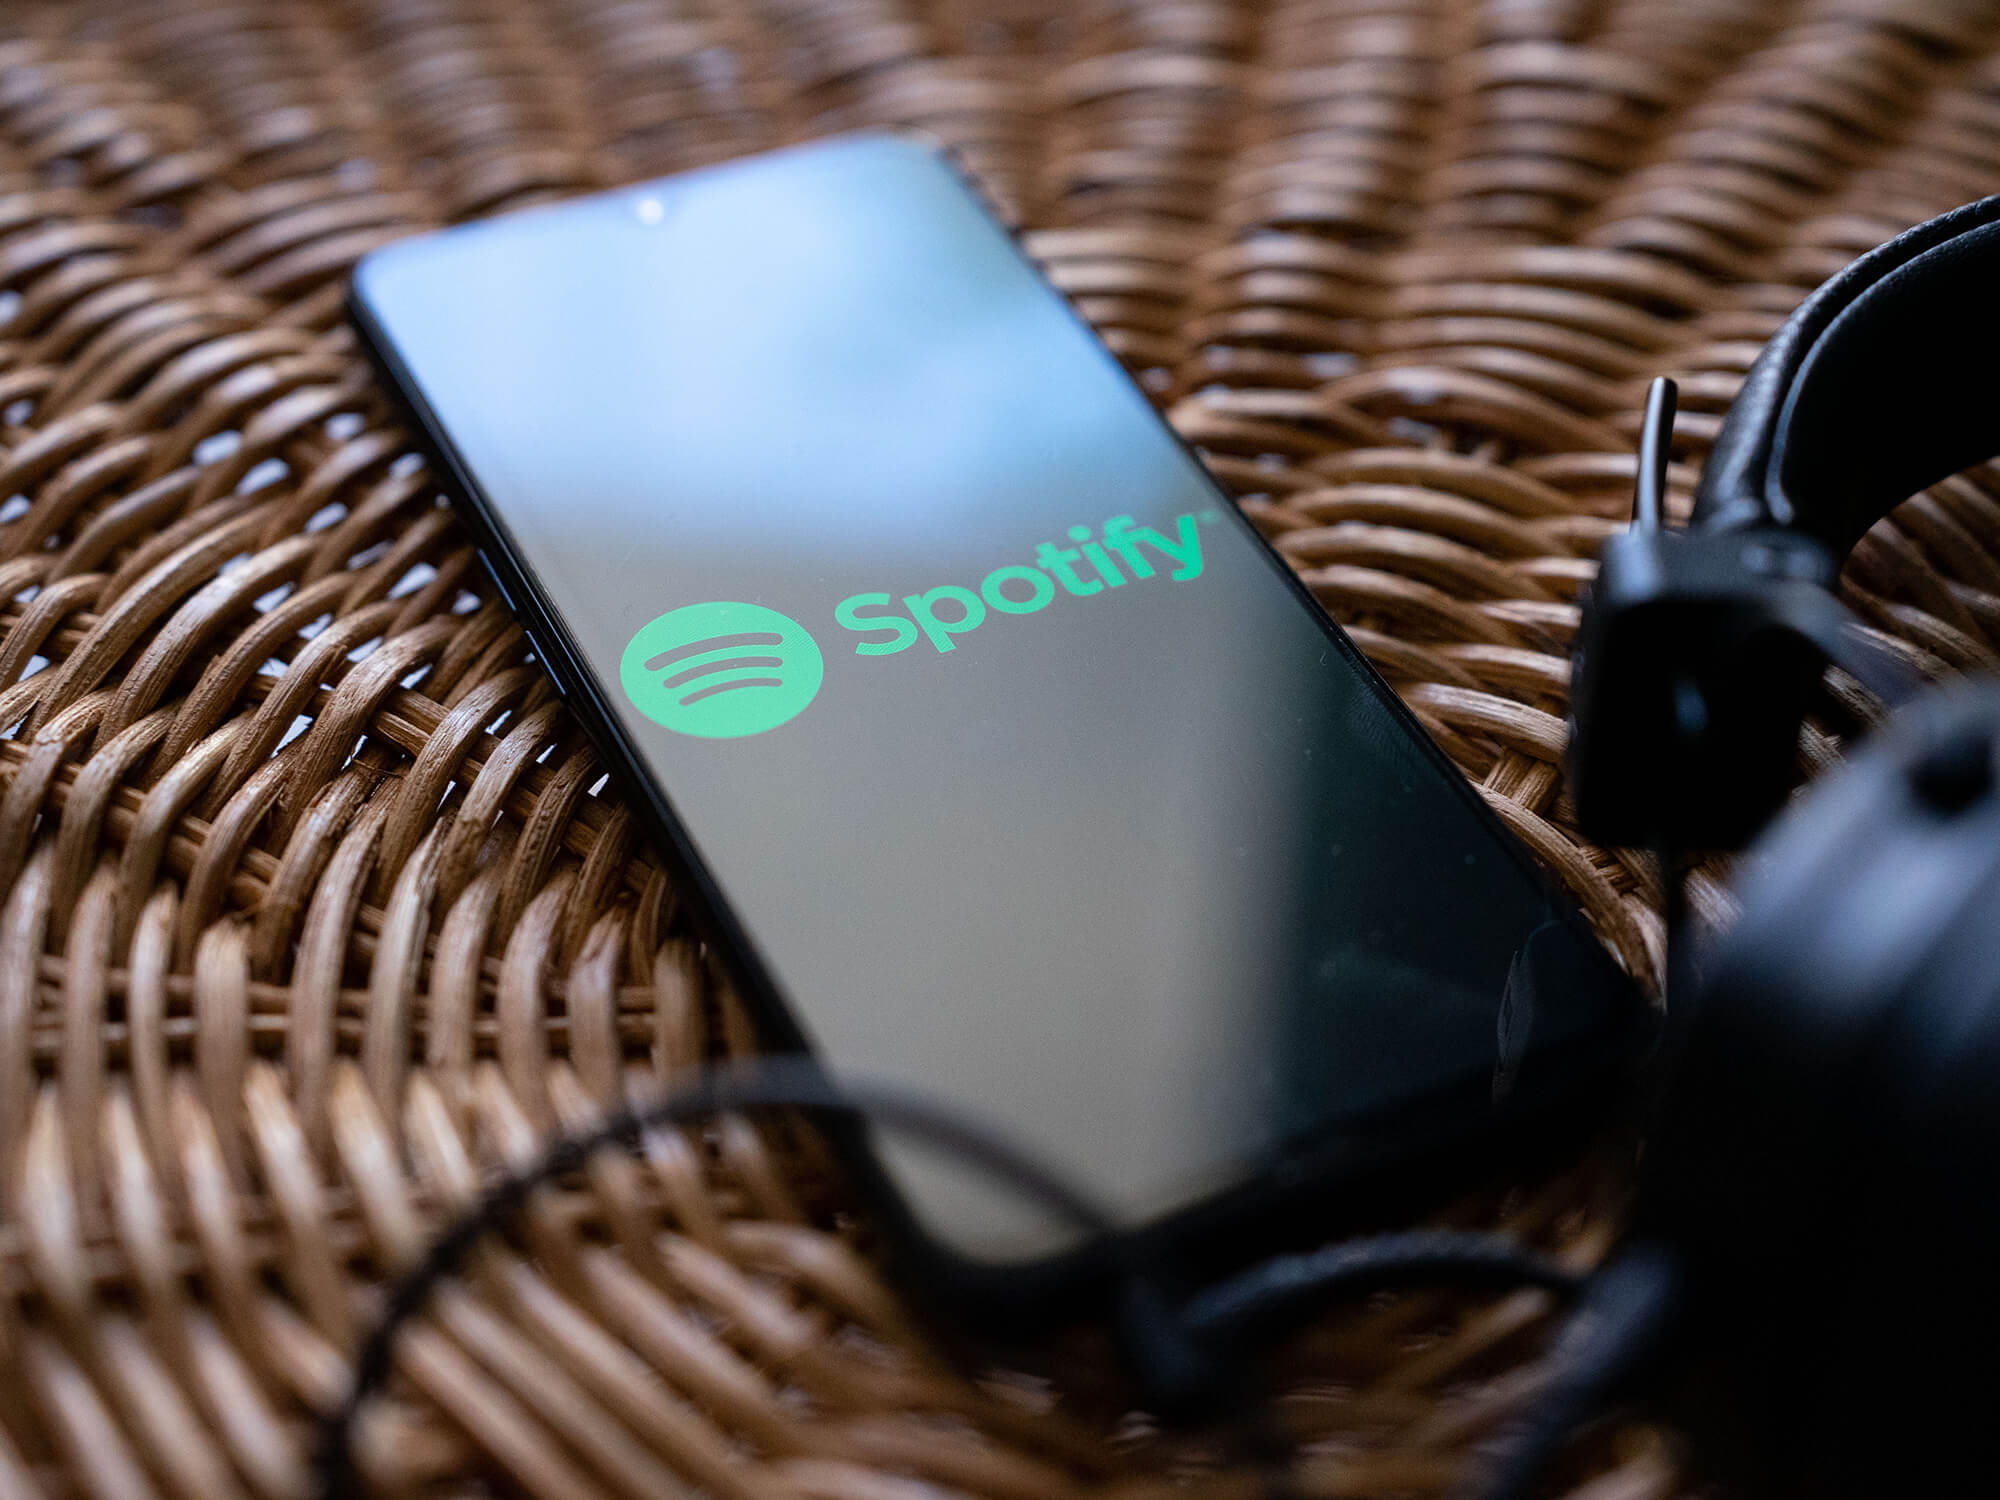 Smartphone with the Spotify app open